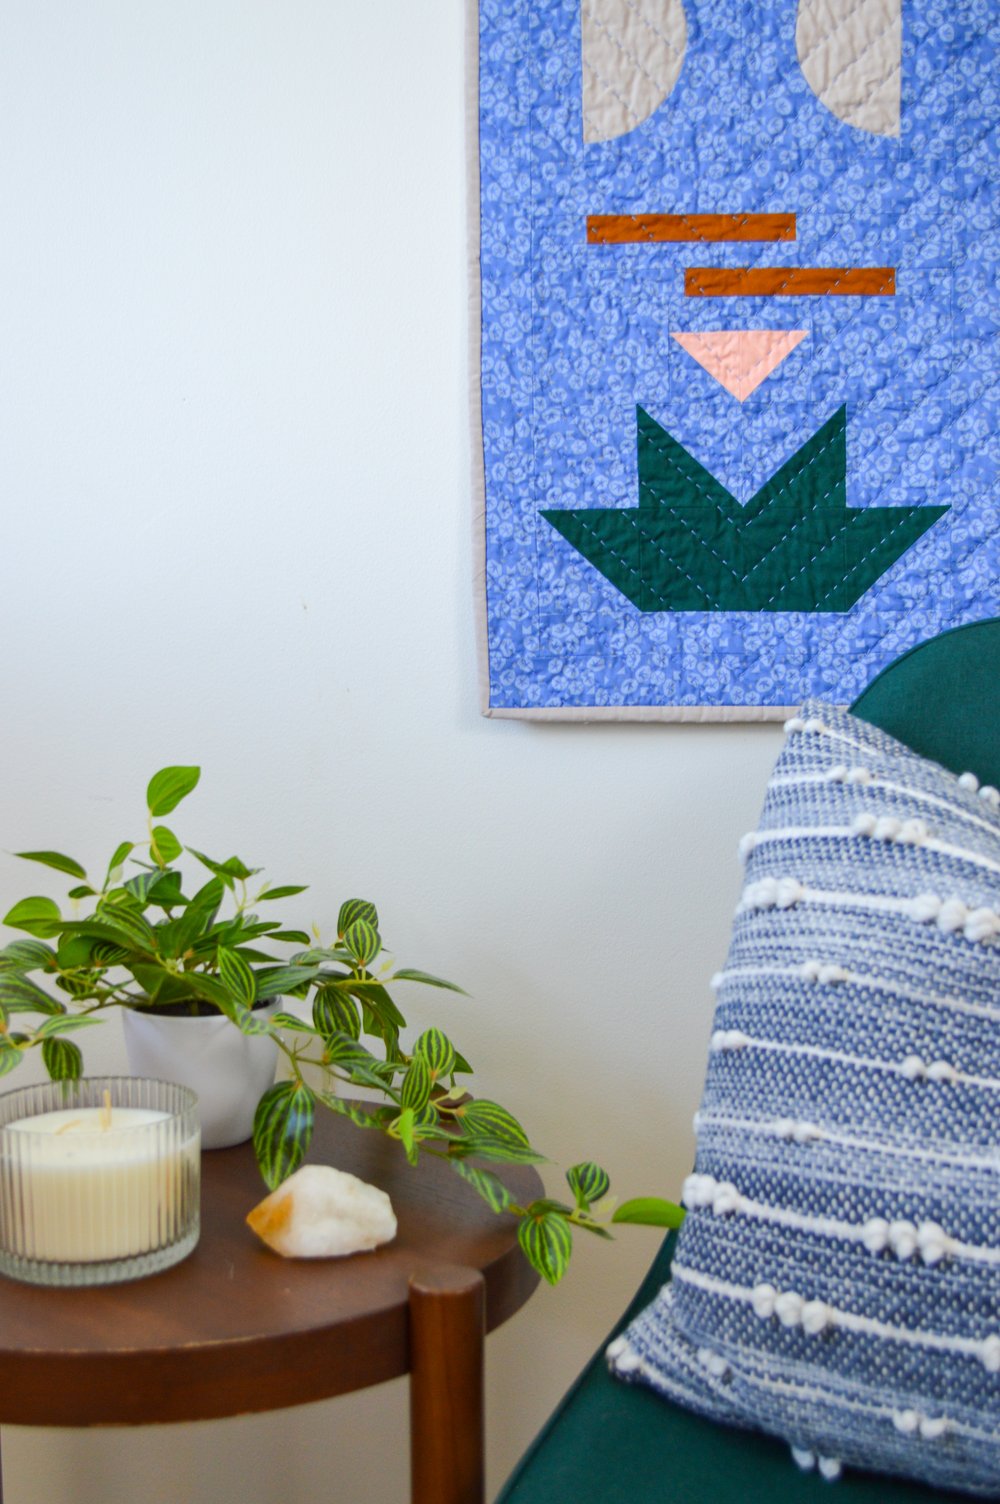 Get Ready to Make your Own Mini Quilt with the Bestla Patterns